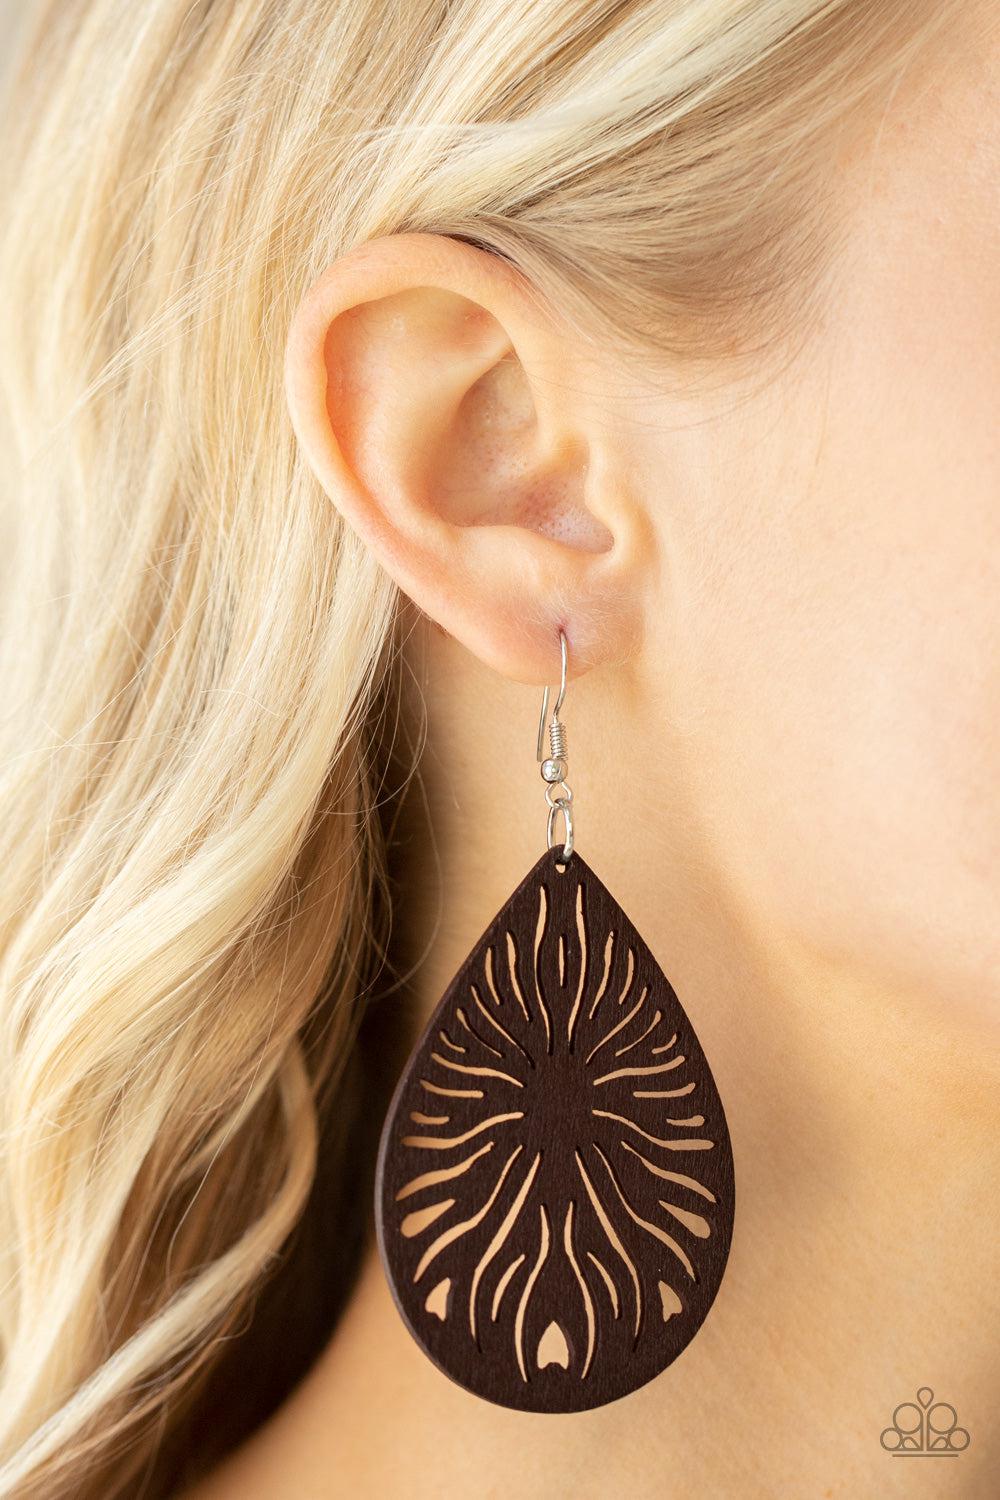 Sunny Incantations Brown Wood Earrings - Paparazzi Accessories- lightbox - CarasShop.com - $5 Jewelry by Cara Jewels